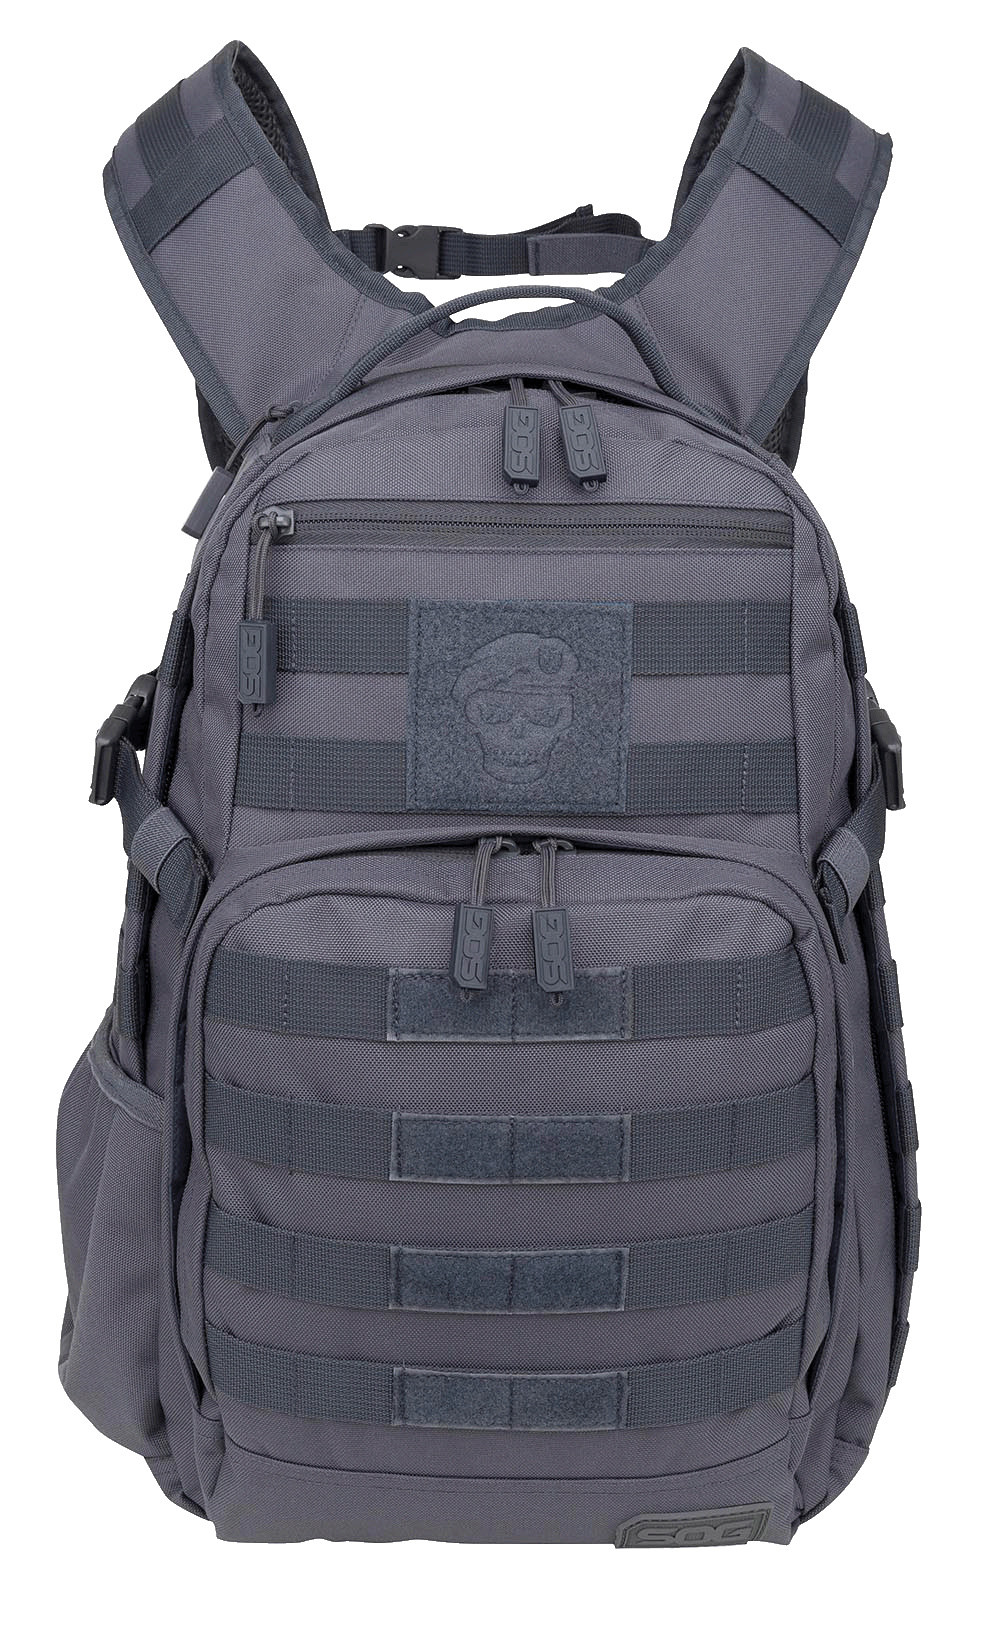 SOG Specialty Knives & Tools Ninja Tactical Day Pack 24.2-Liter Backpack 